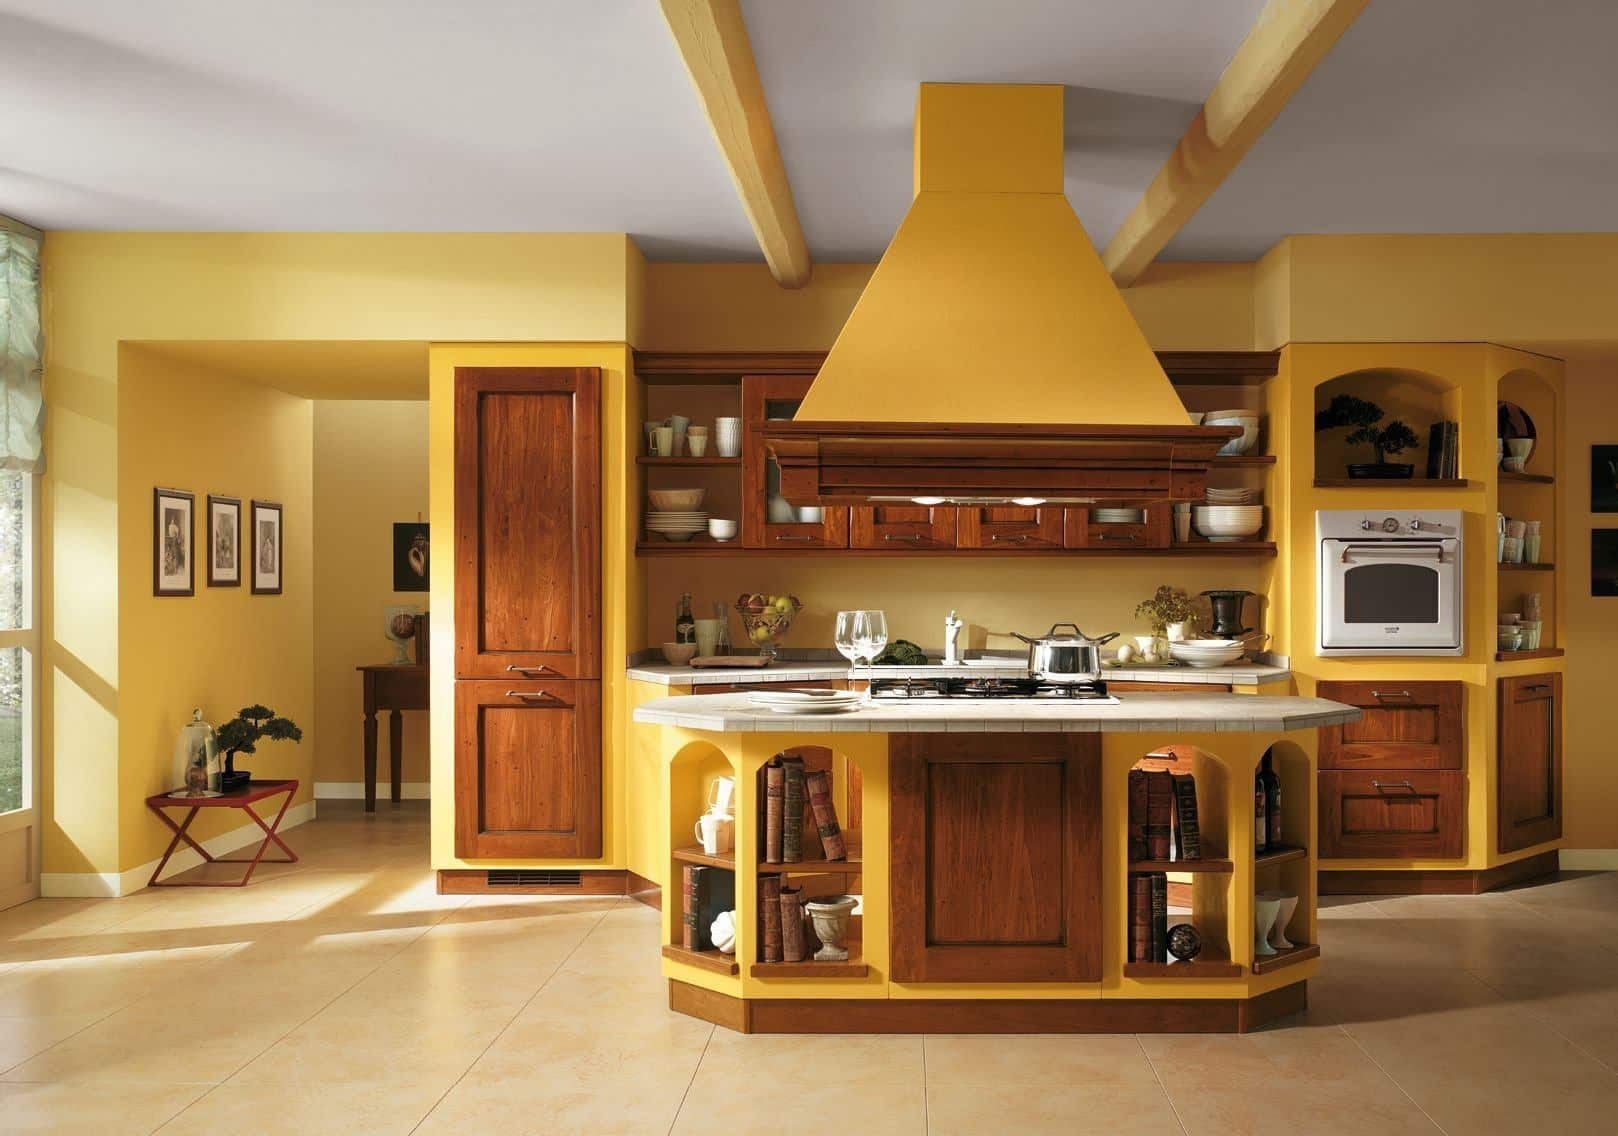 Yellow color for the juicy accents of the modern Egyptian kitchen decor